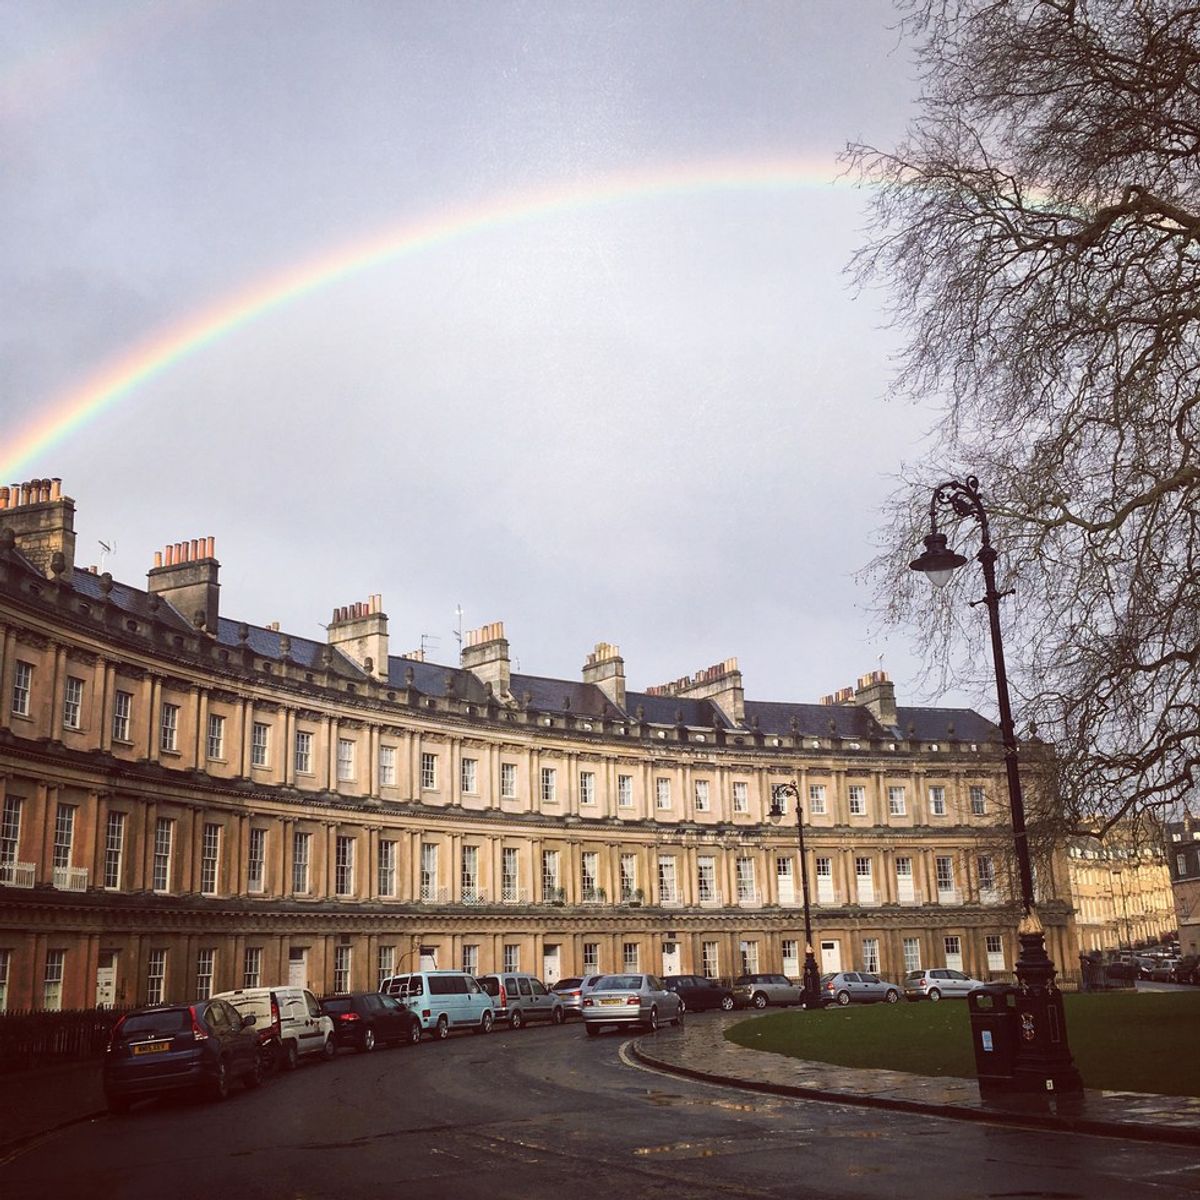 Beginner's Guide To Bath: Adjusting To England